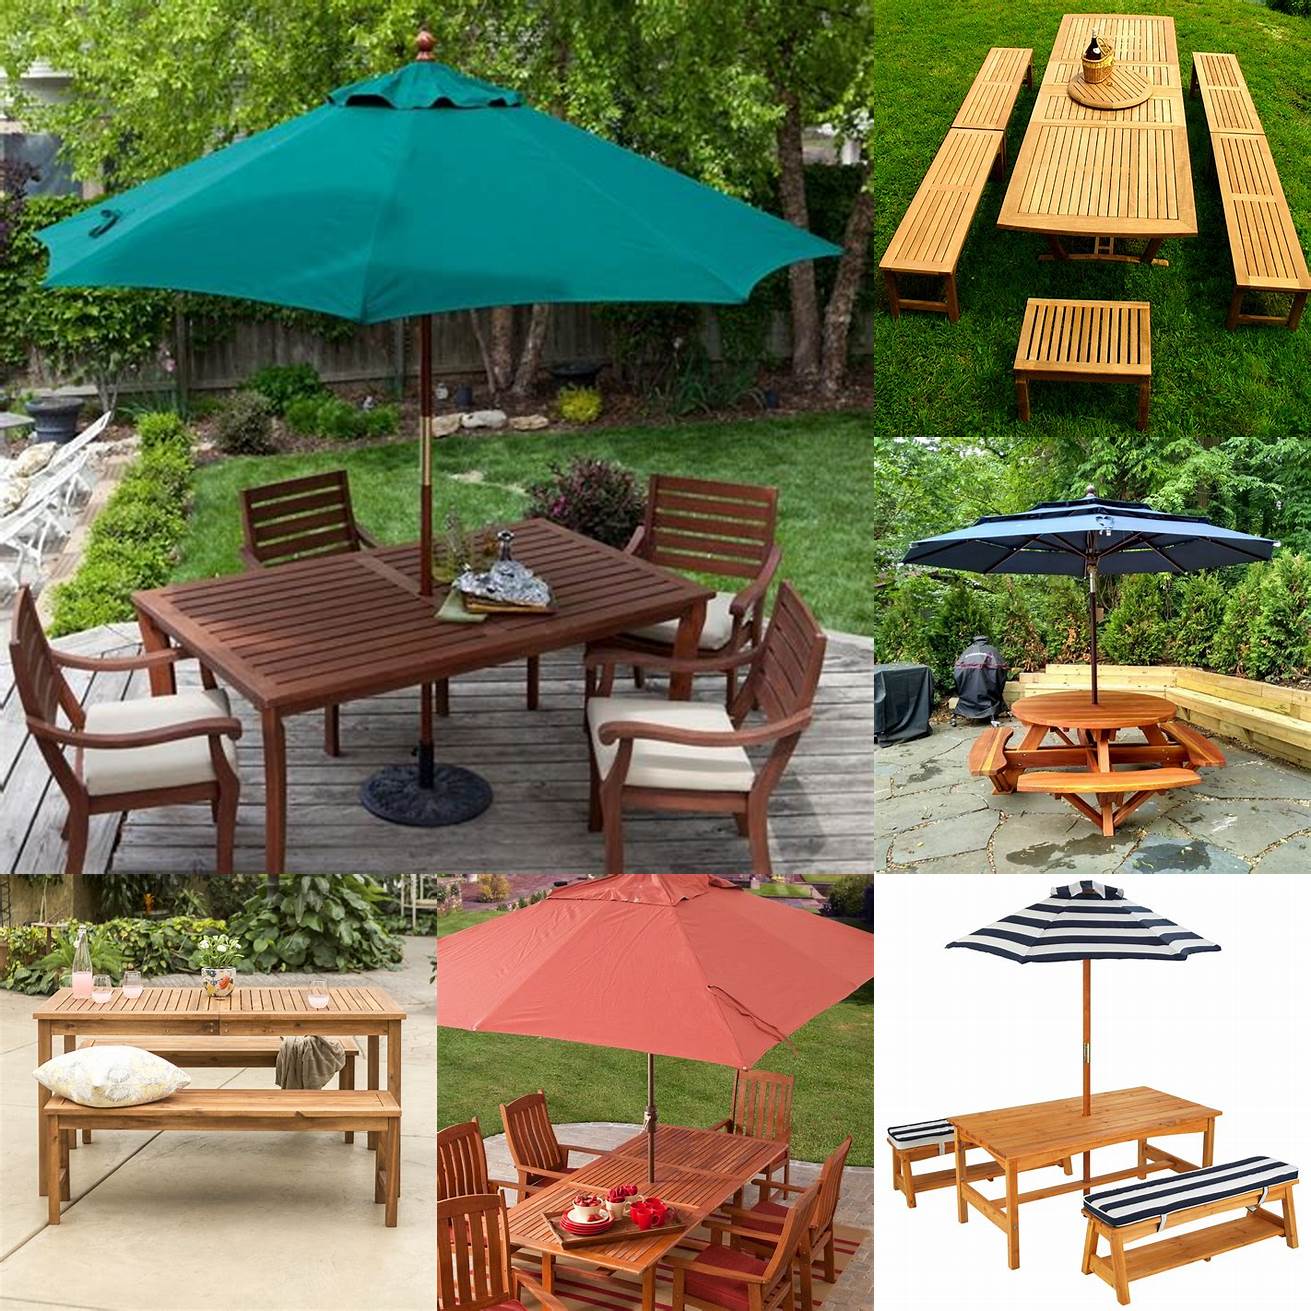 Teak Picnic Table and Benches With Umbrella